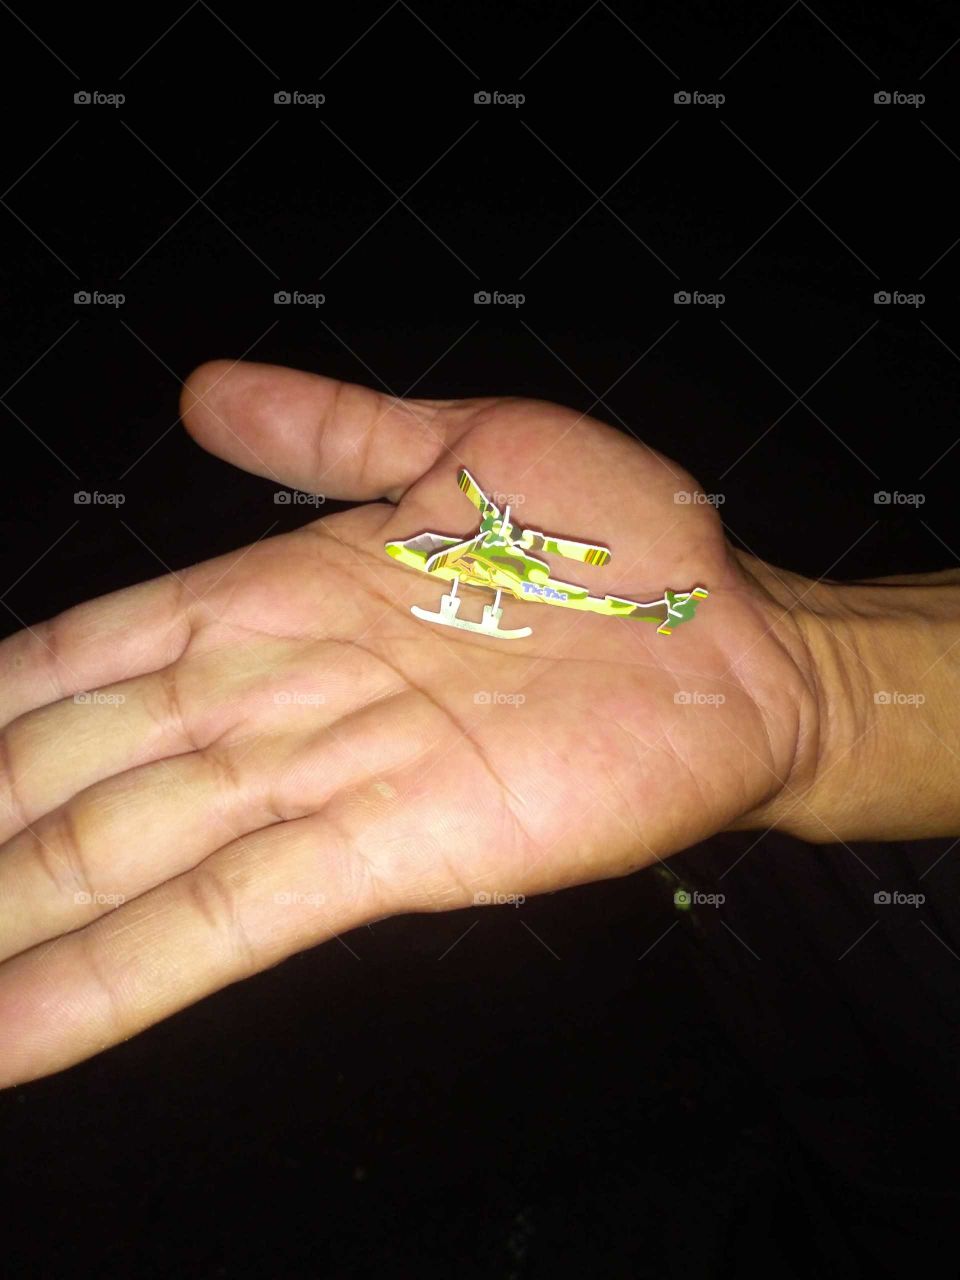 small helicopter toy in hand